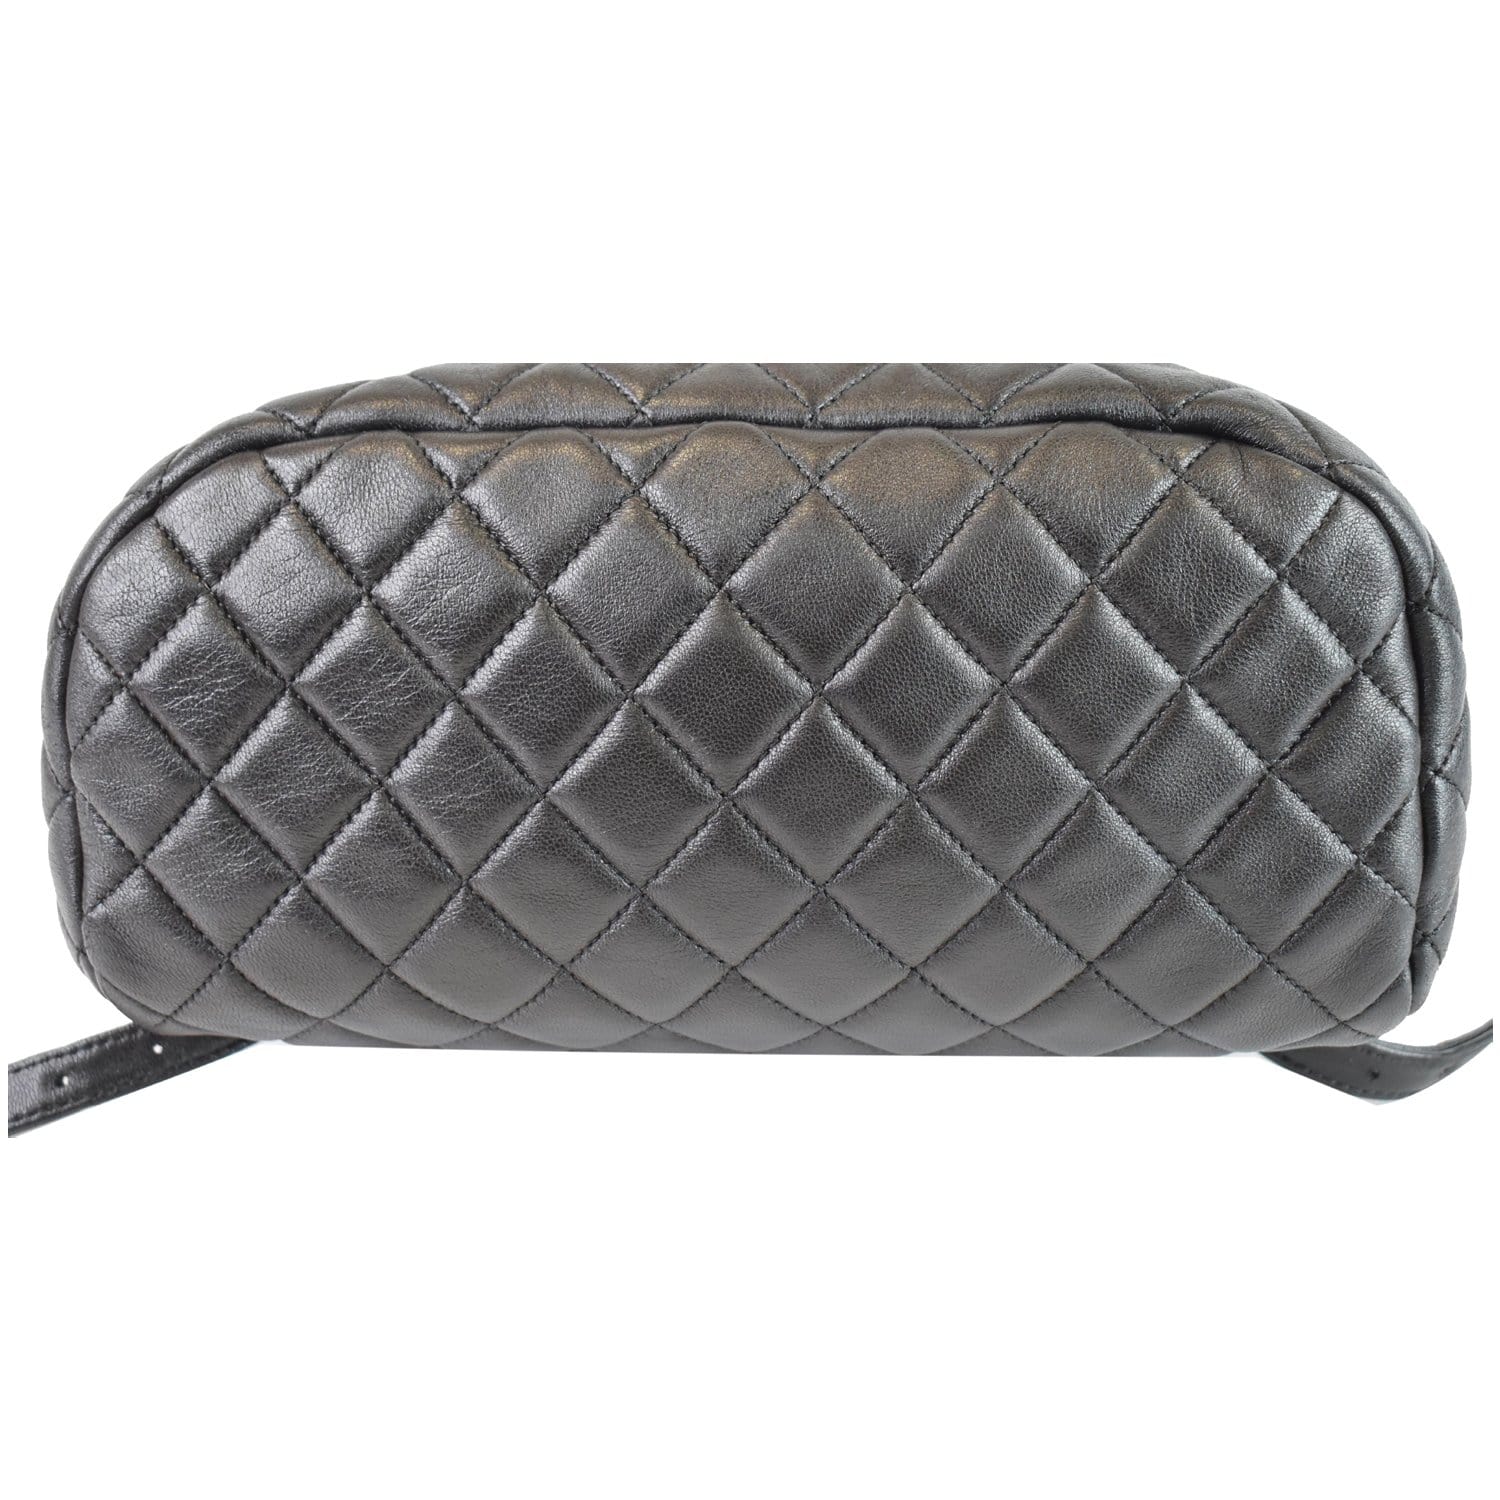 Chanel Small Urban Spirit Quilted Lambskin Backpack Bag